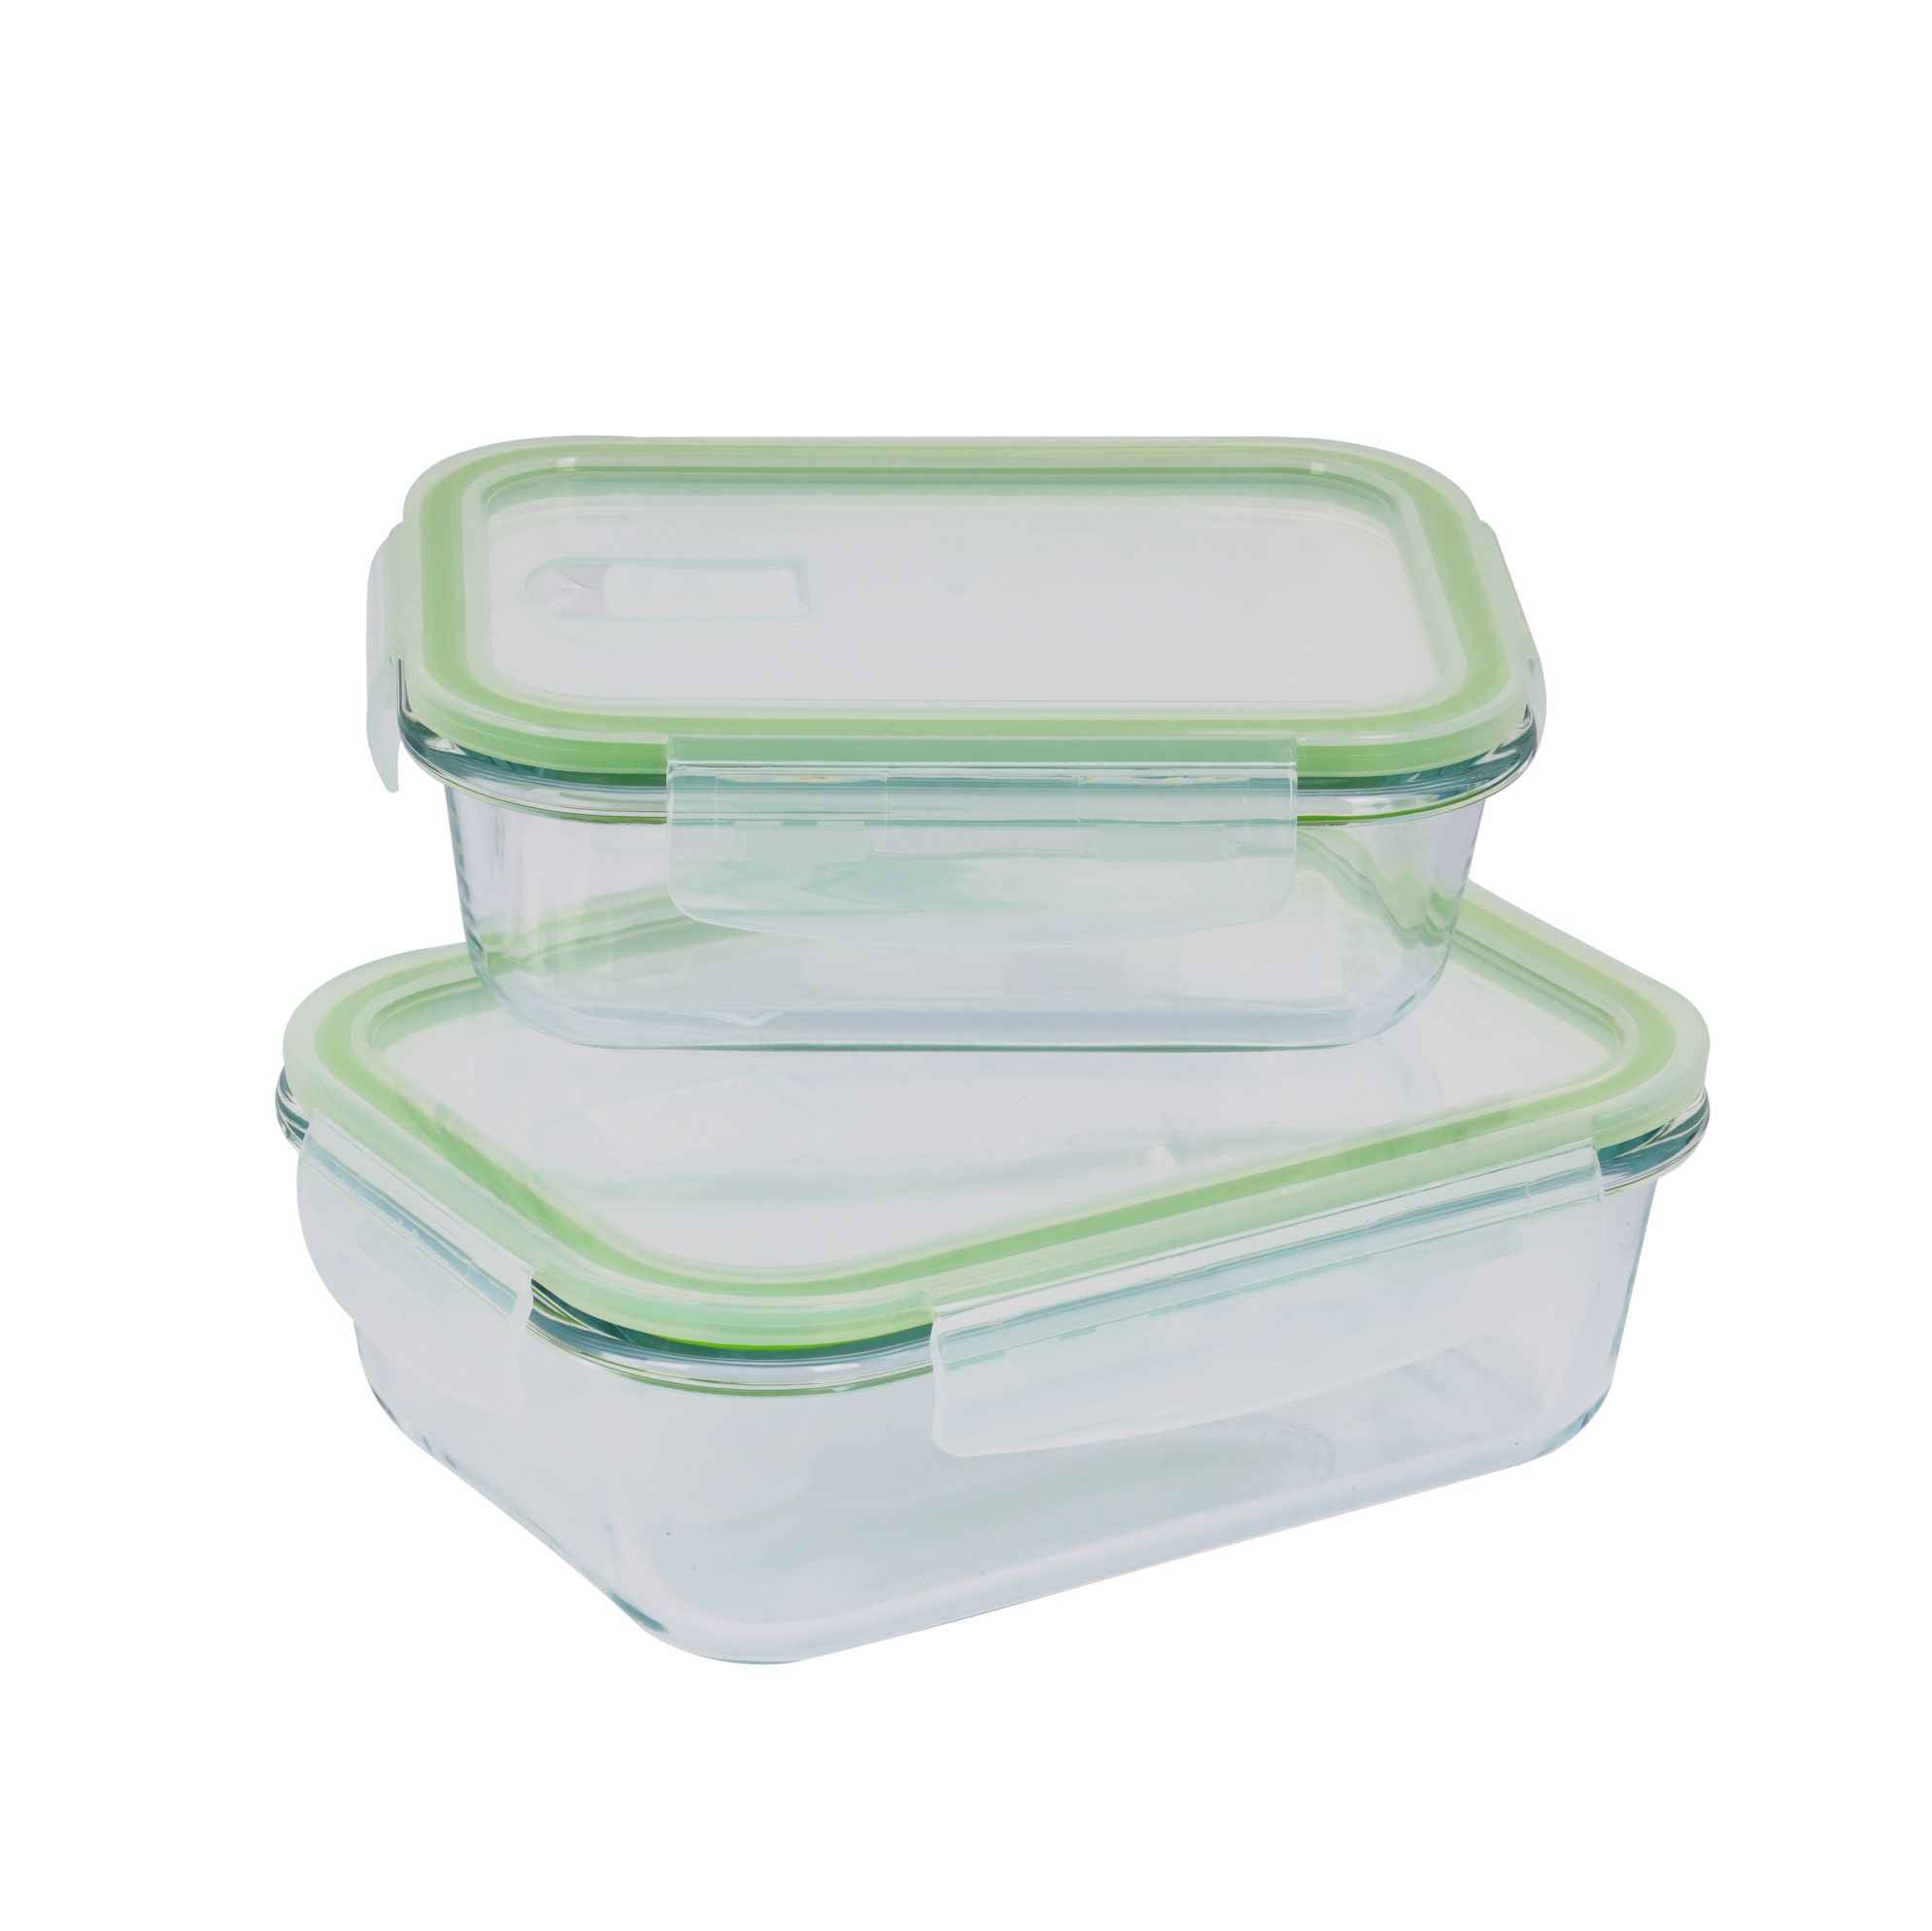 Royalford Rf9985 2Pcs Glass Airtight Container With Lids - Durable Heat Resistant Borosilicate Glass Dishwasher/Oven/Freezer Safe | Glass Meal Prep Containers